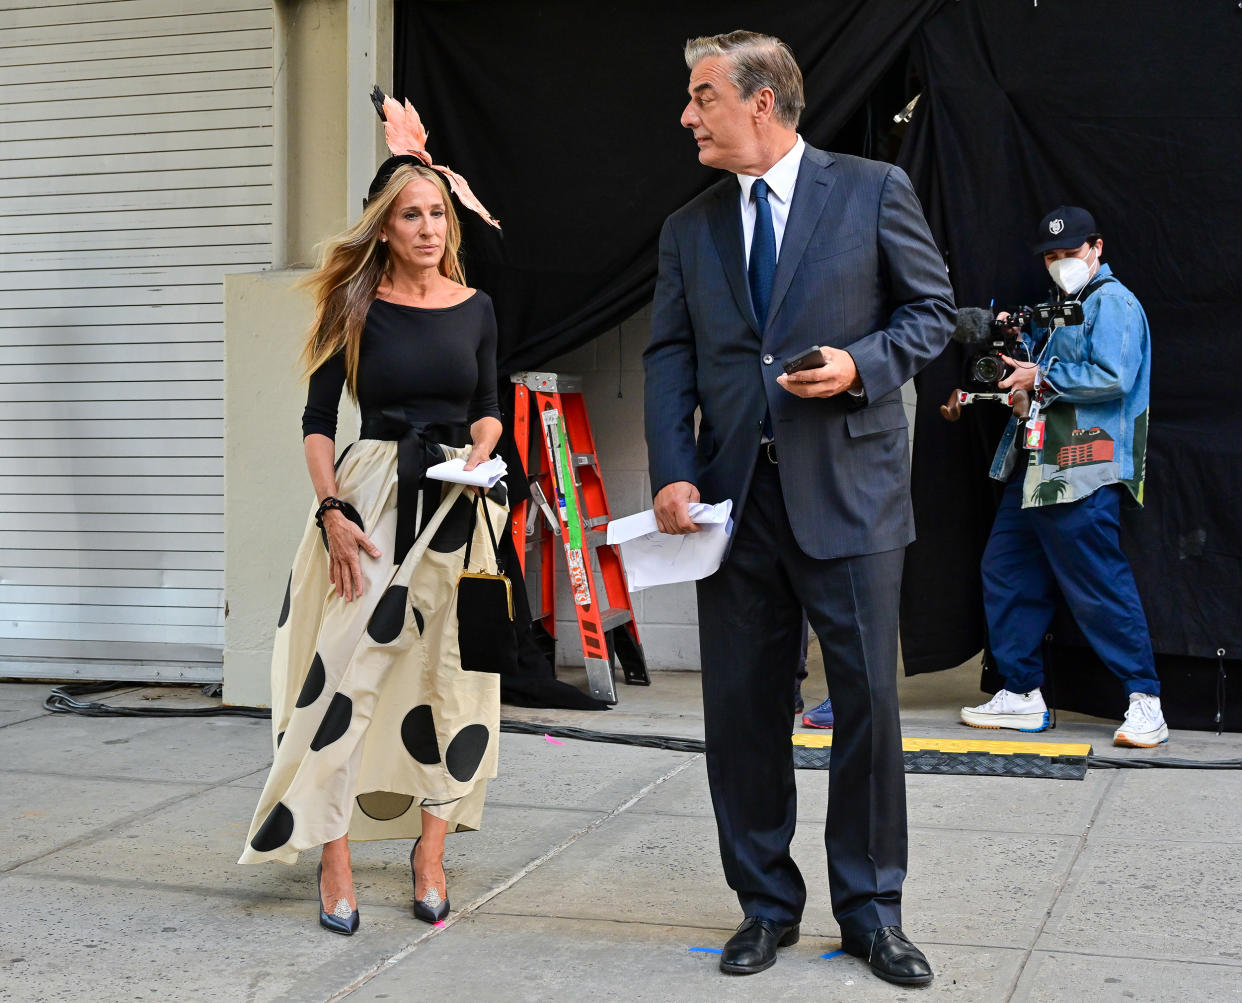 Sarah Jessica Parker and Chris Noth on the set of 